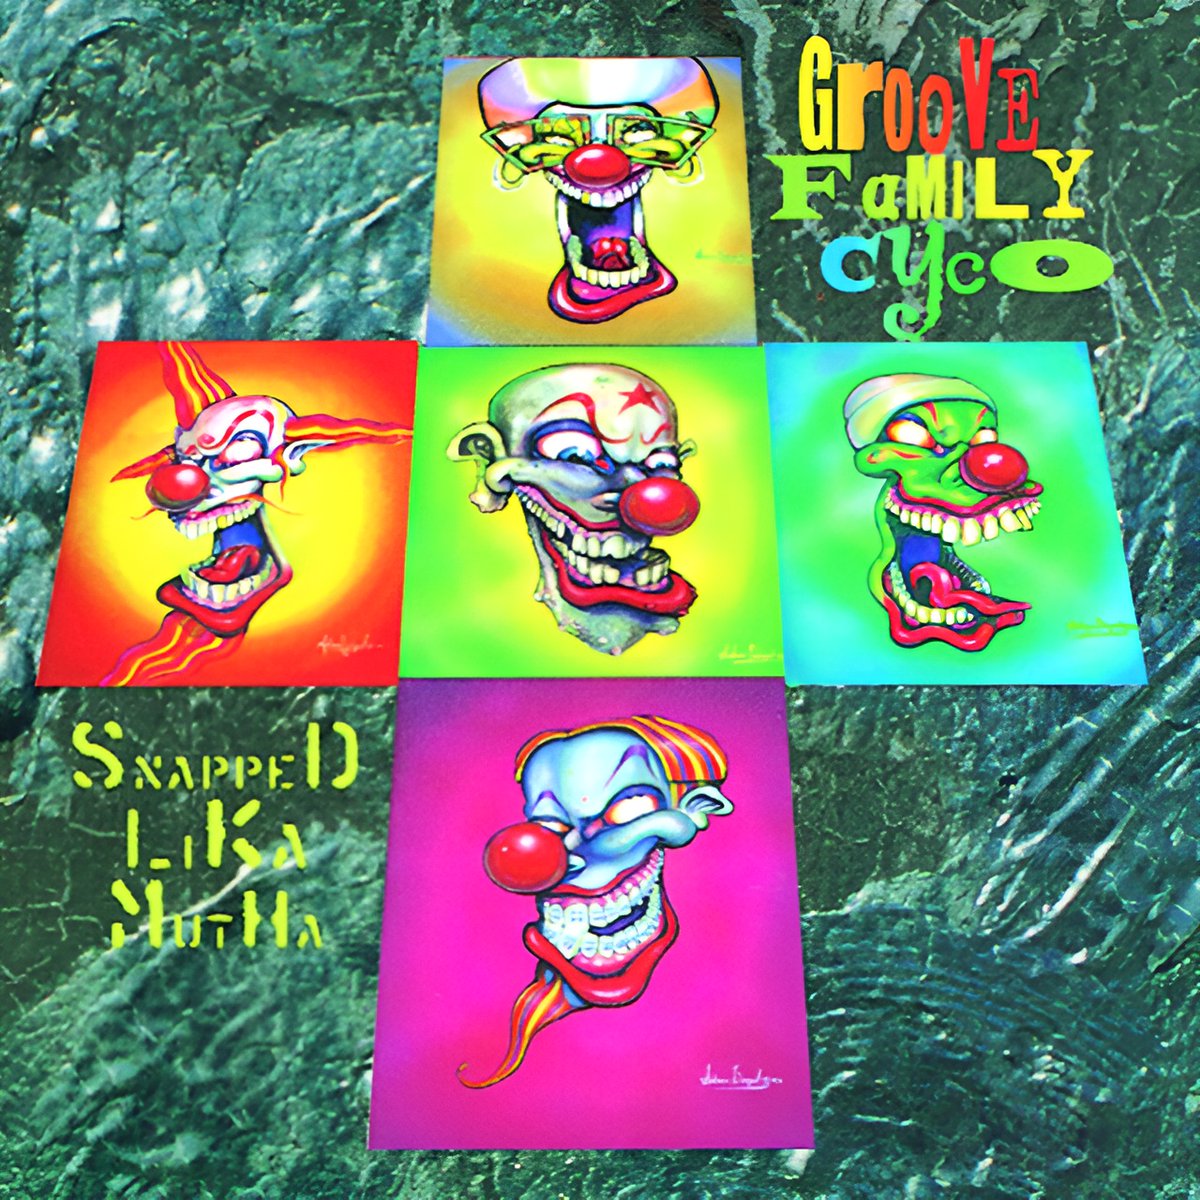 Infectious Grooves - Groove Family Cyco
#band #infectiousgrooves #album #groovefamilycyco #madeinusa #1994 #alternativemetal #funkmetal #metal #90s #music #pixelart